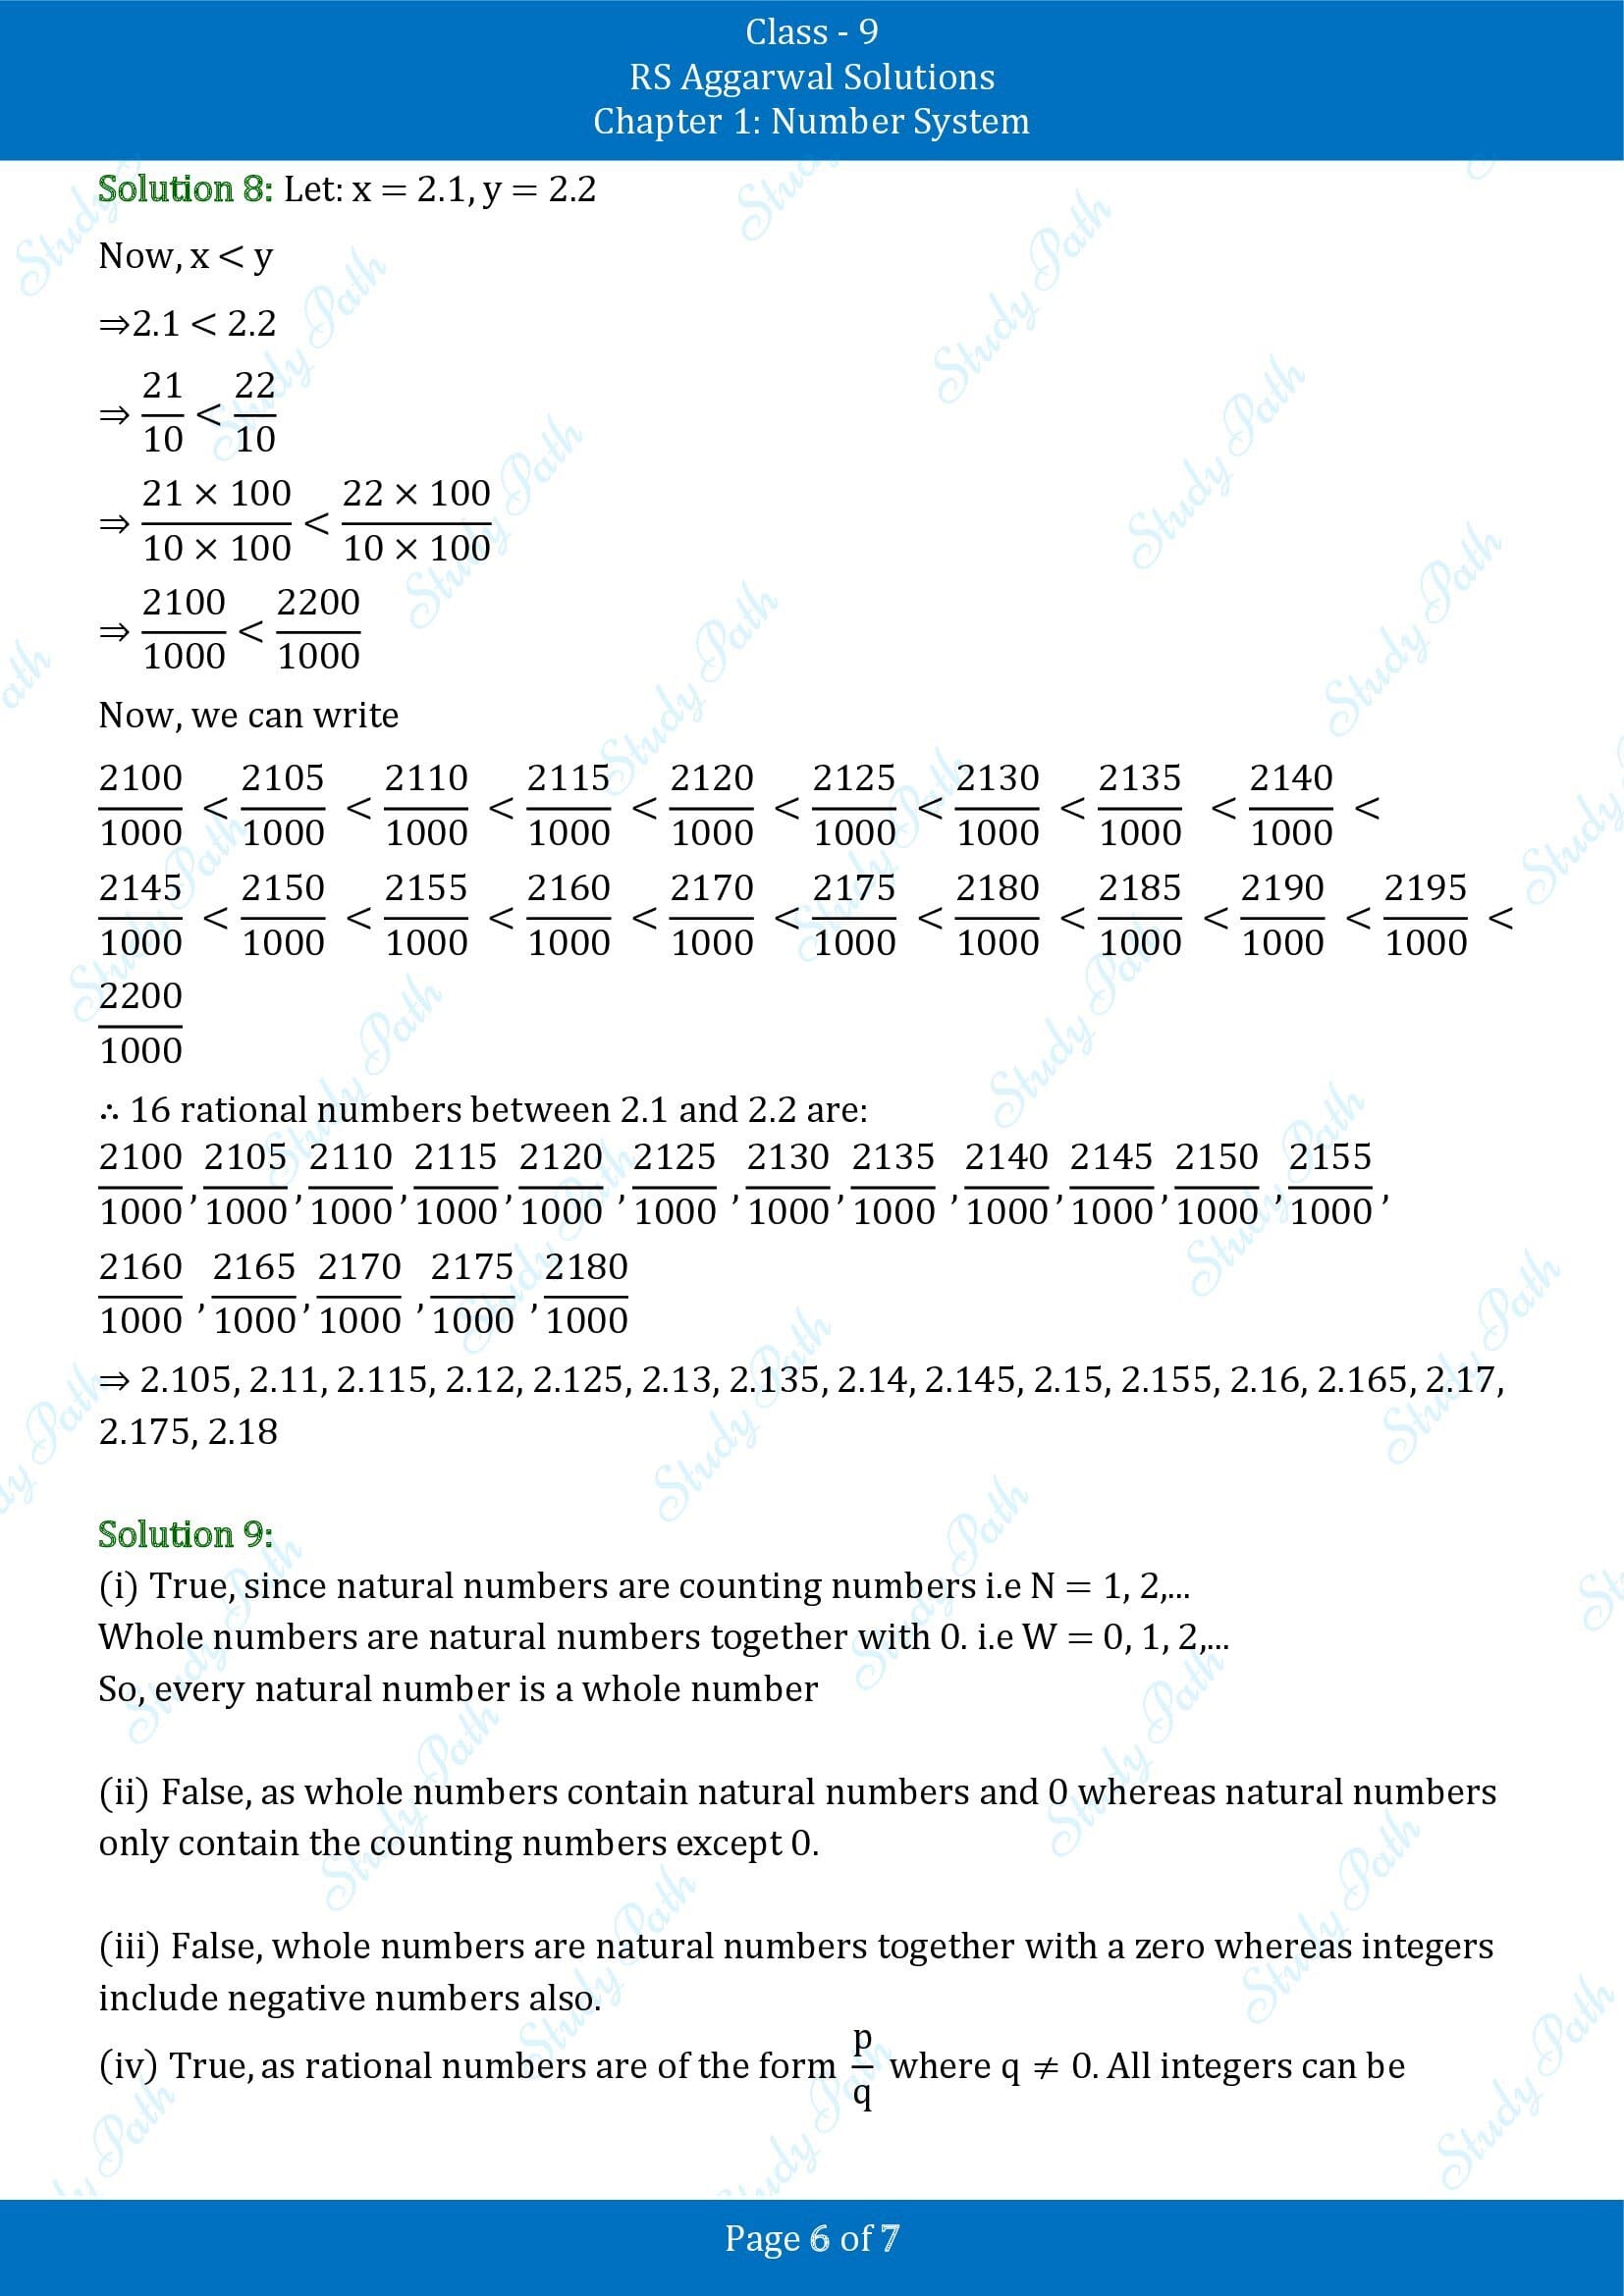 RS Aggarwal Solutions Class 9 Chapter 1 Number System Exercise 1A 00006